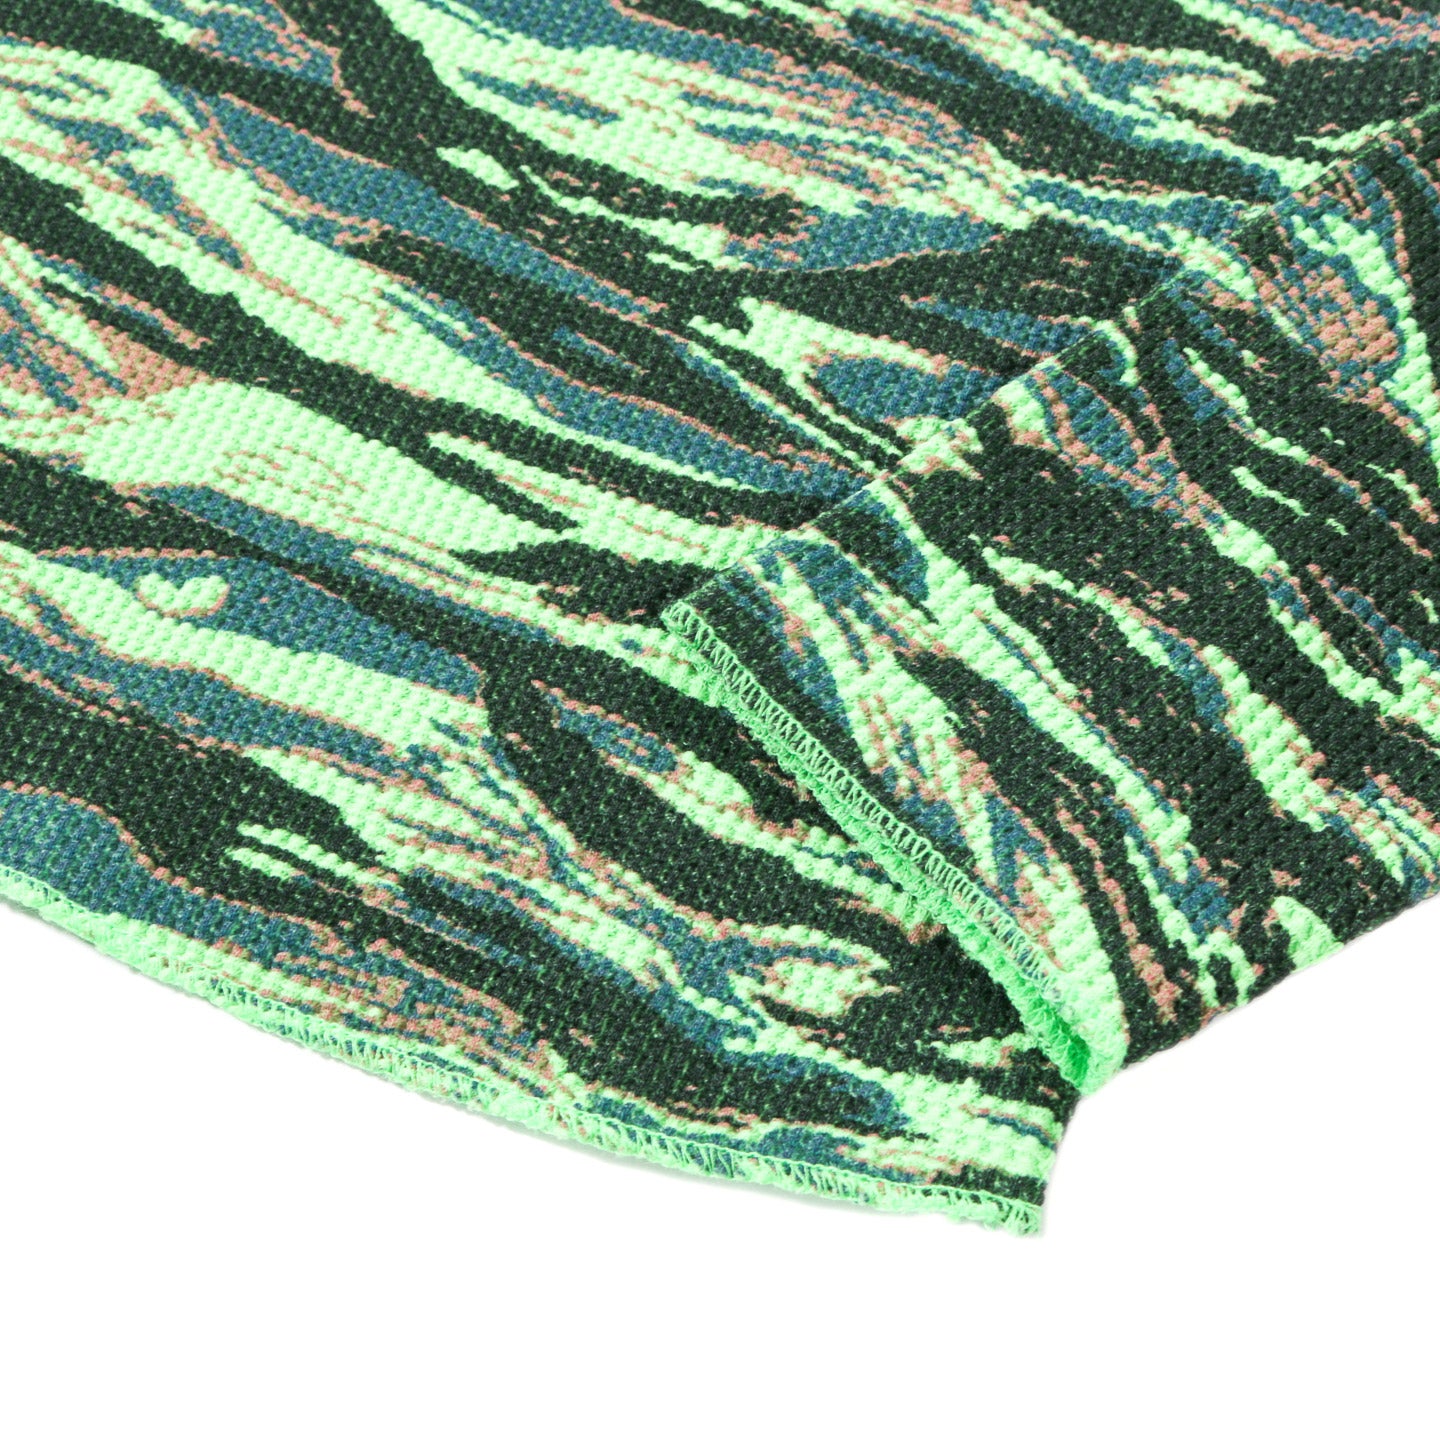 ERL RAVE CAMO THERMAL SHIRT GREEN